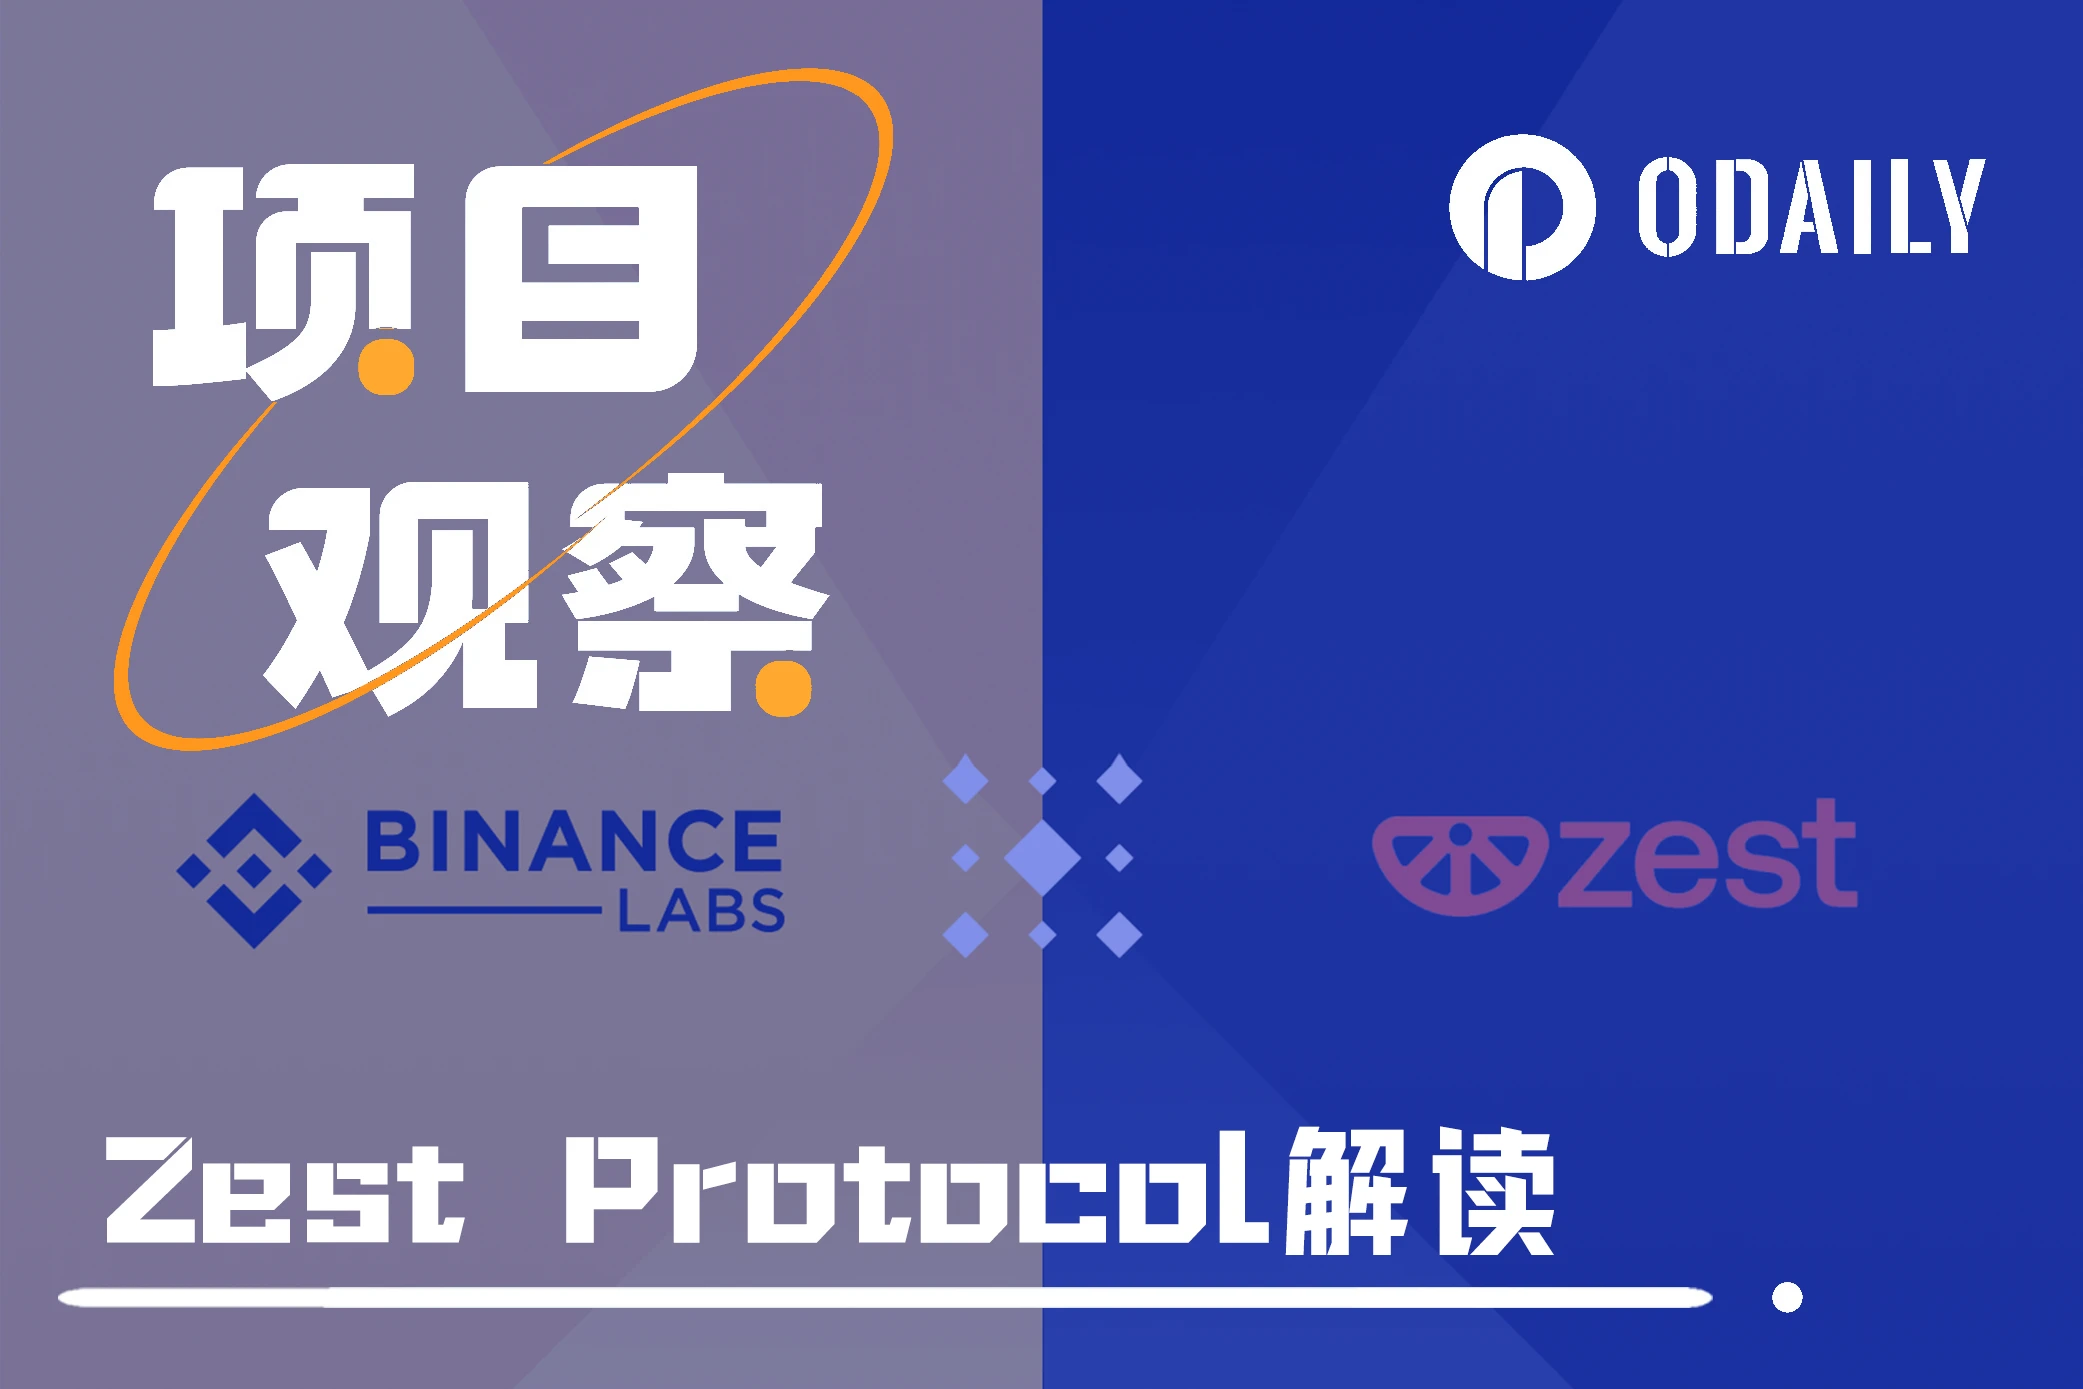 Binance Labs participates in the investment, an article explains the Stacks lending market Zest